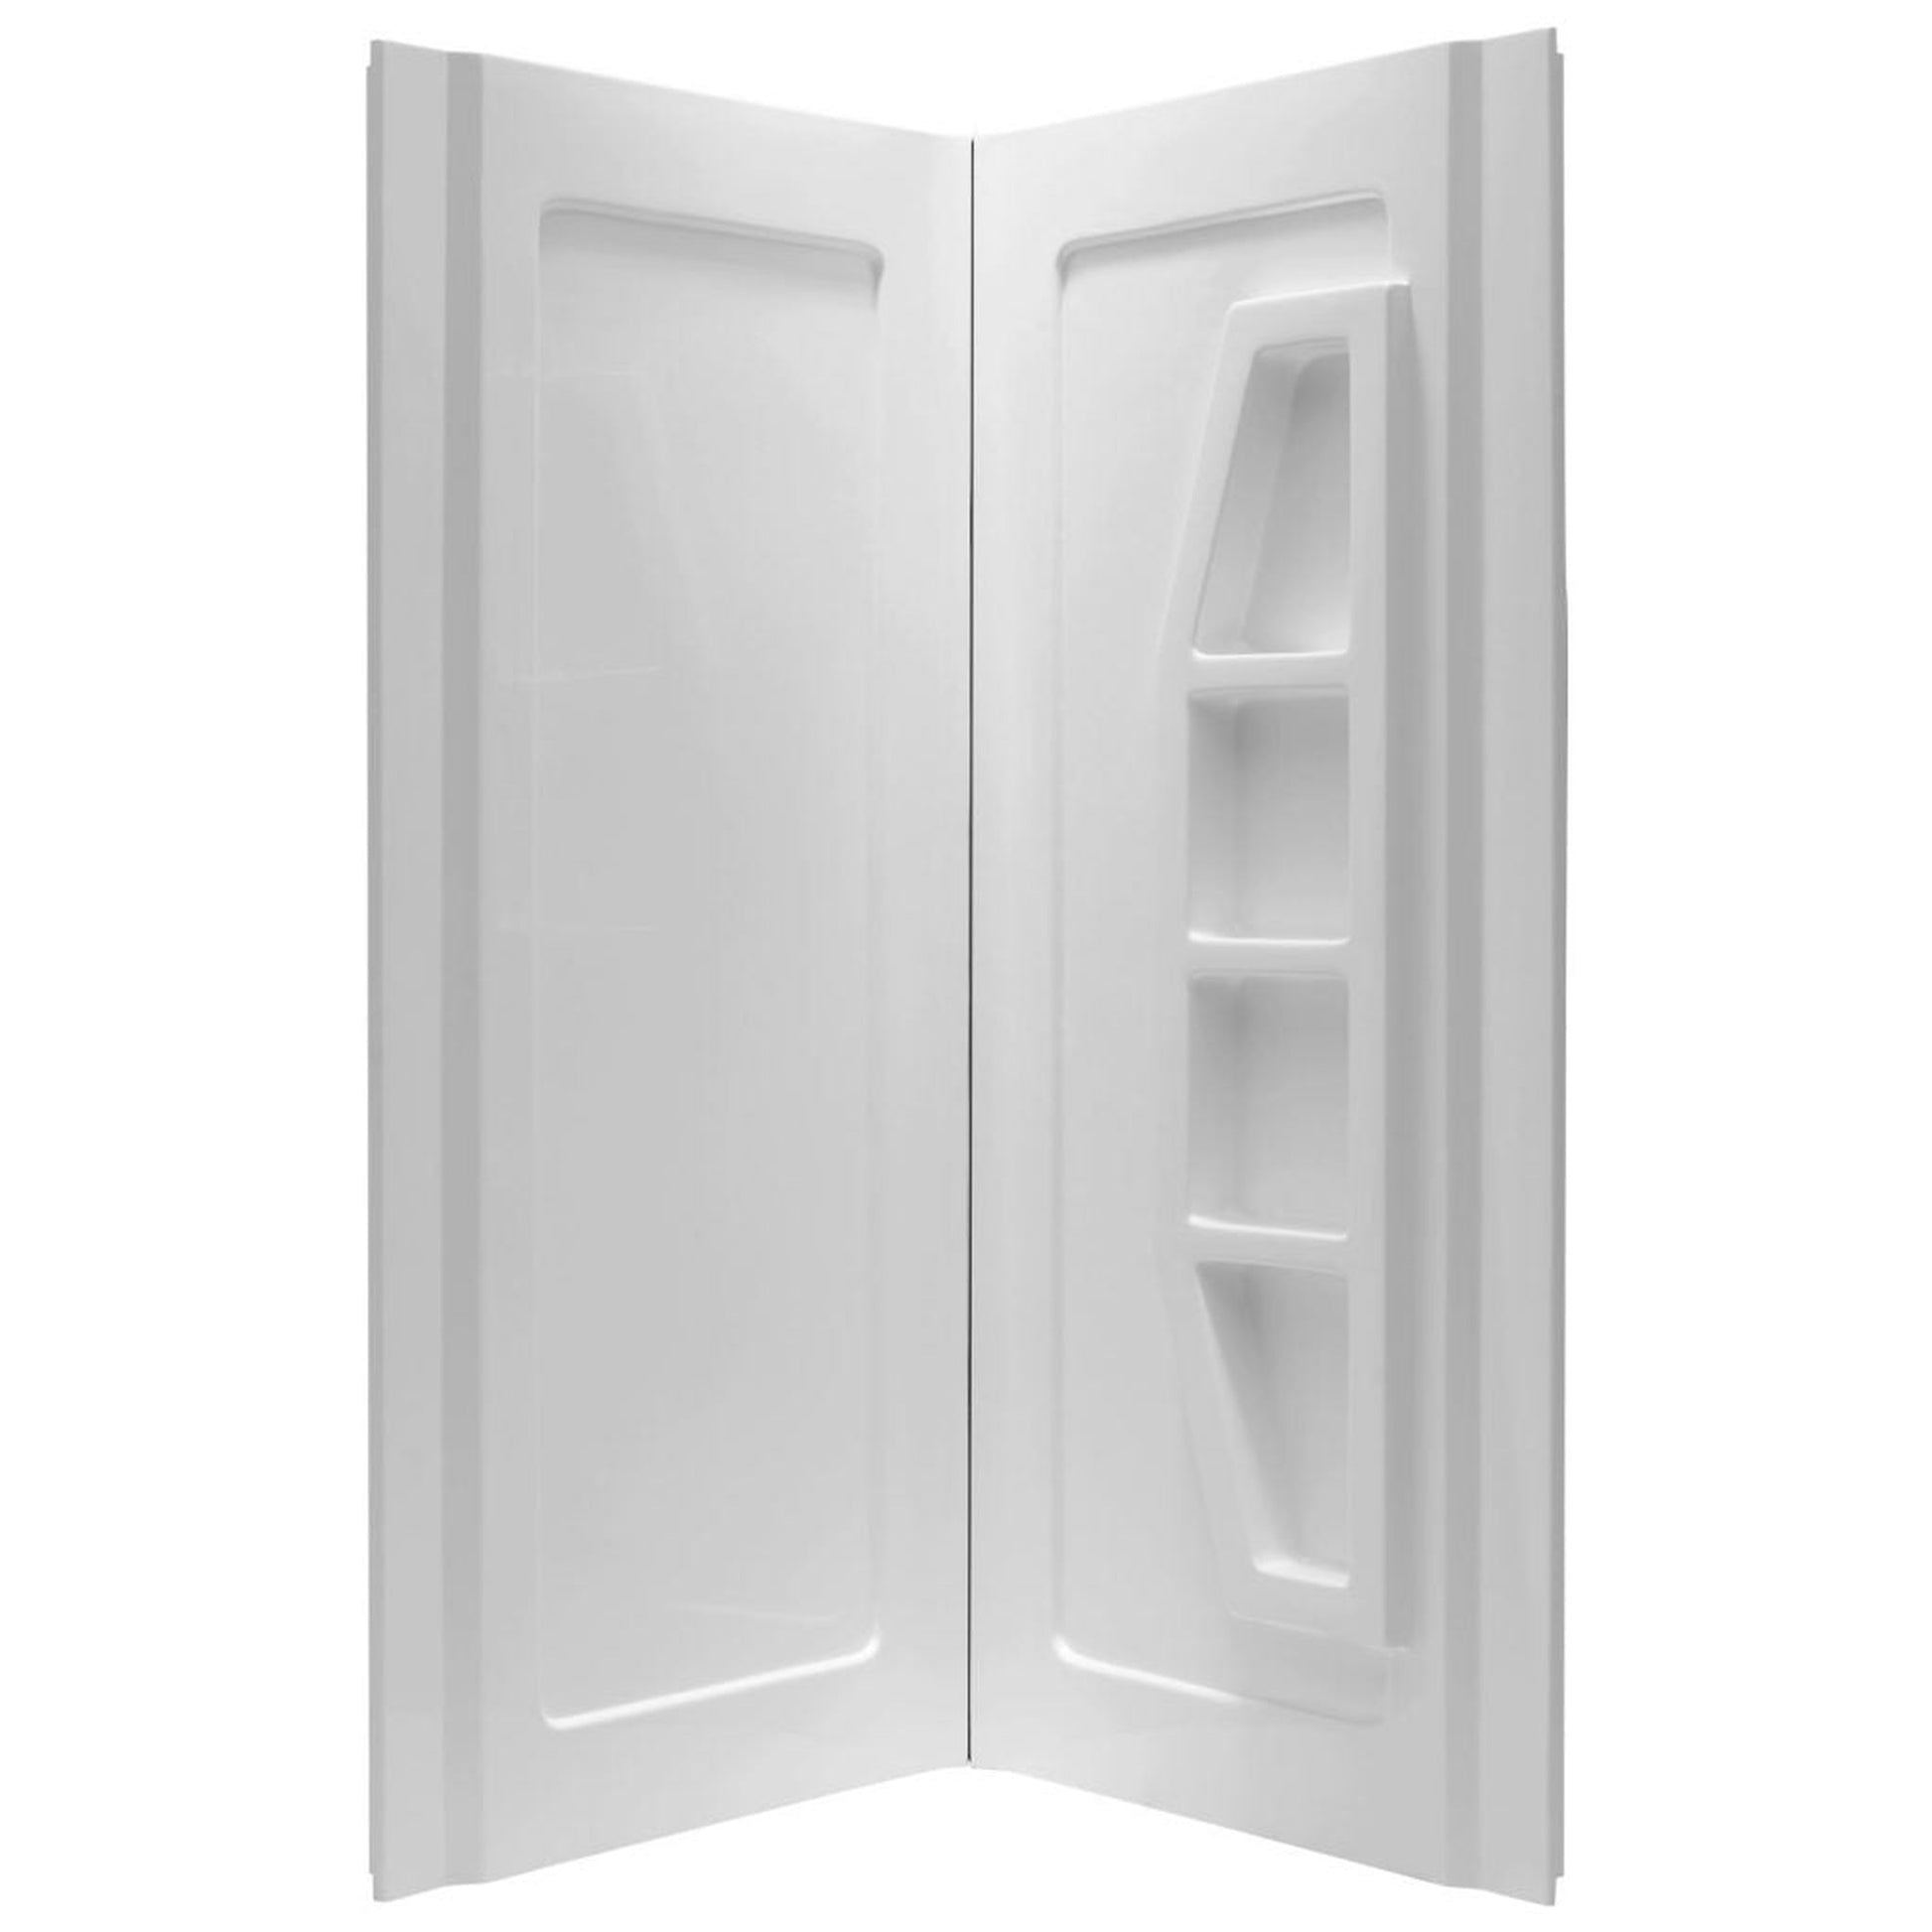 https://usbathstore.com/cdn/shop/products/ANZZI-Sharman-Series-36-x-36-x-74-White-Acrylic-Corner-Two-Piece-Shower-Wall-System-With-4-Built-in-Shelves.jpg?v=1673267965&width=1946